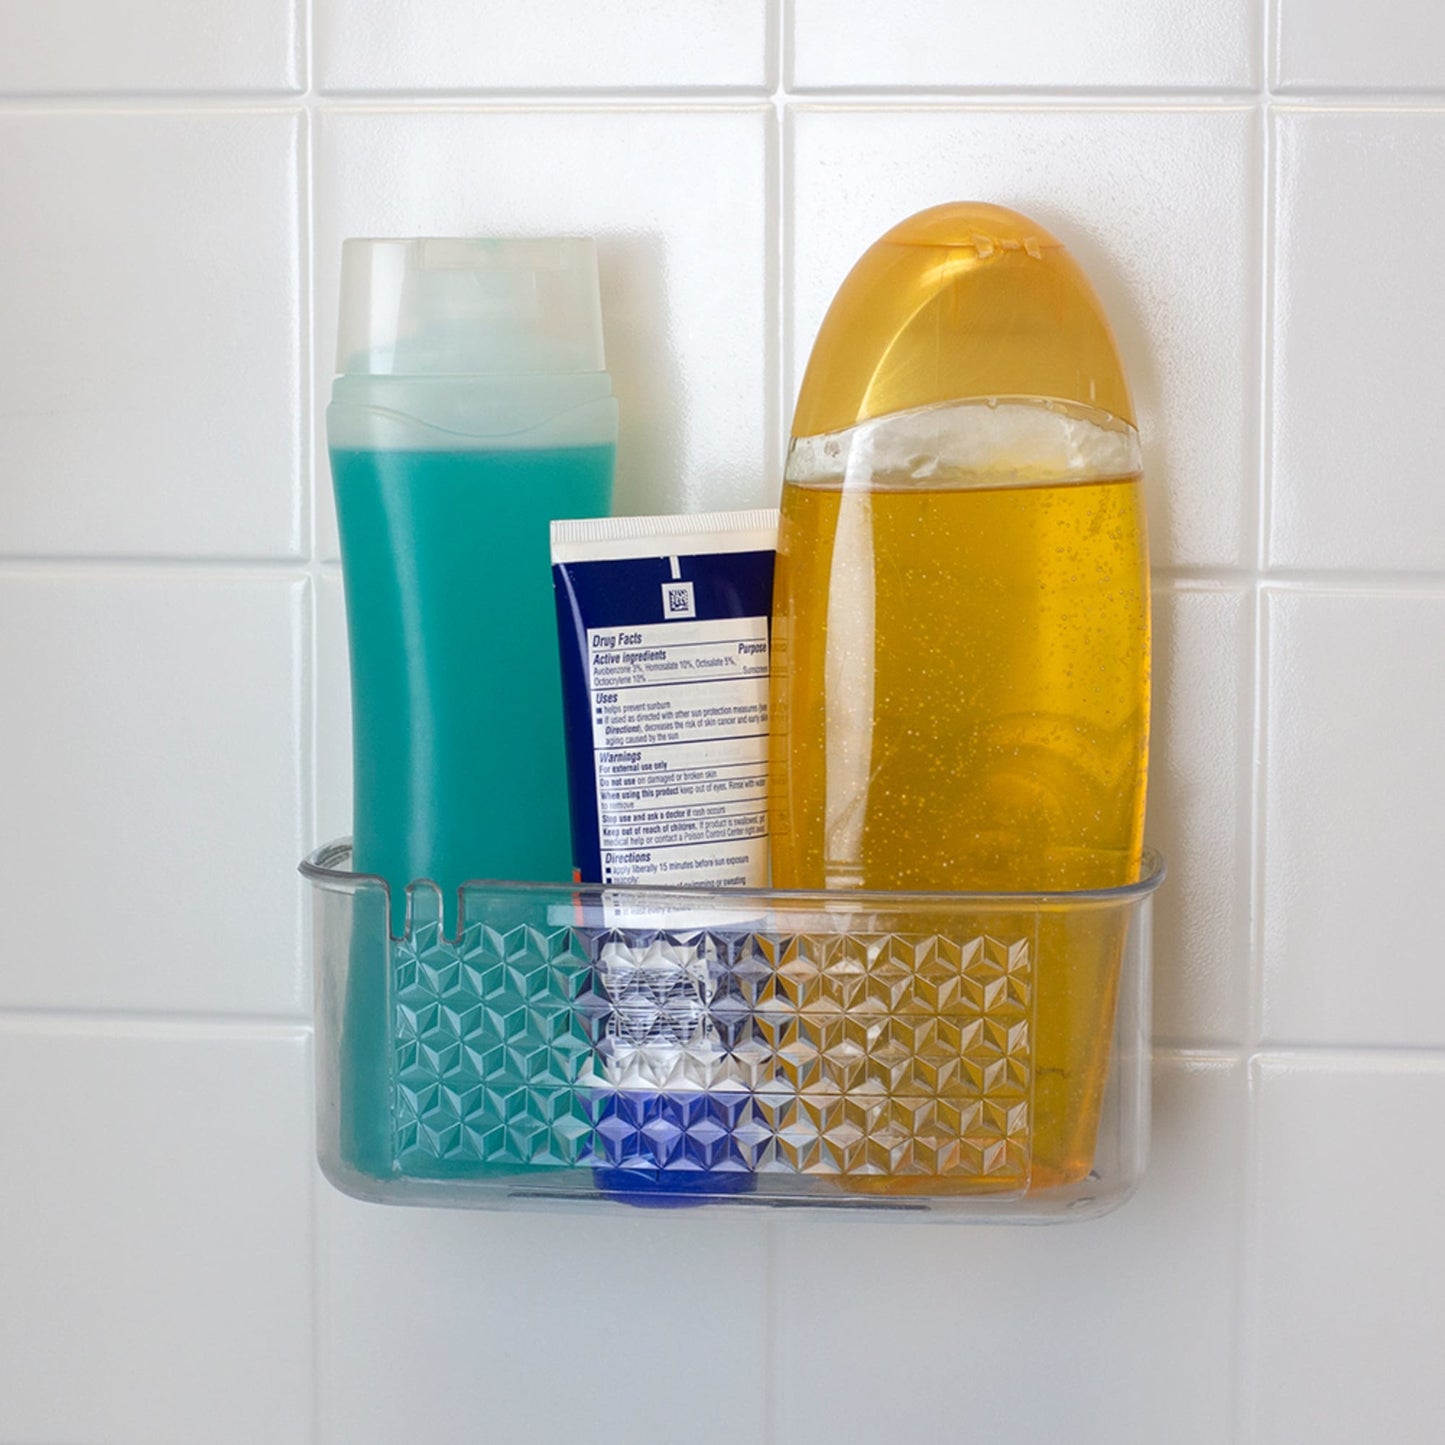 Medium Cubic Patterned Plastic Shower Caddy with Suction Cups, Clear